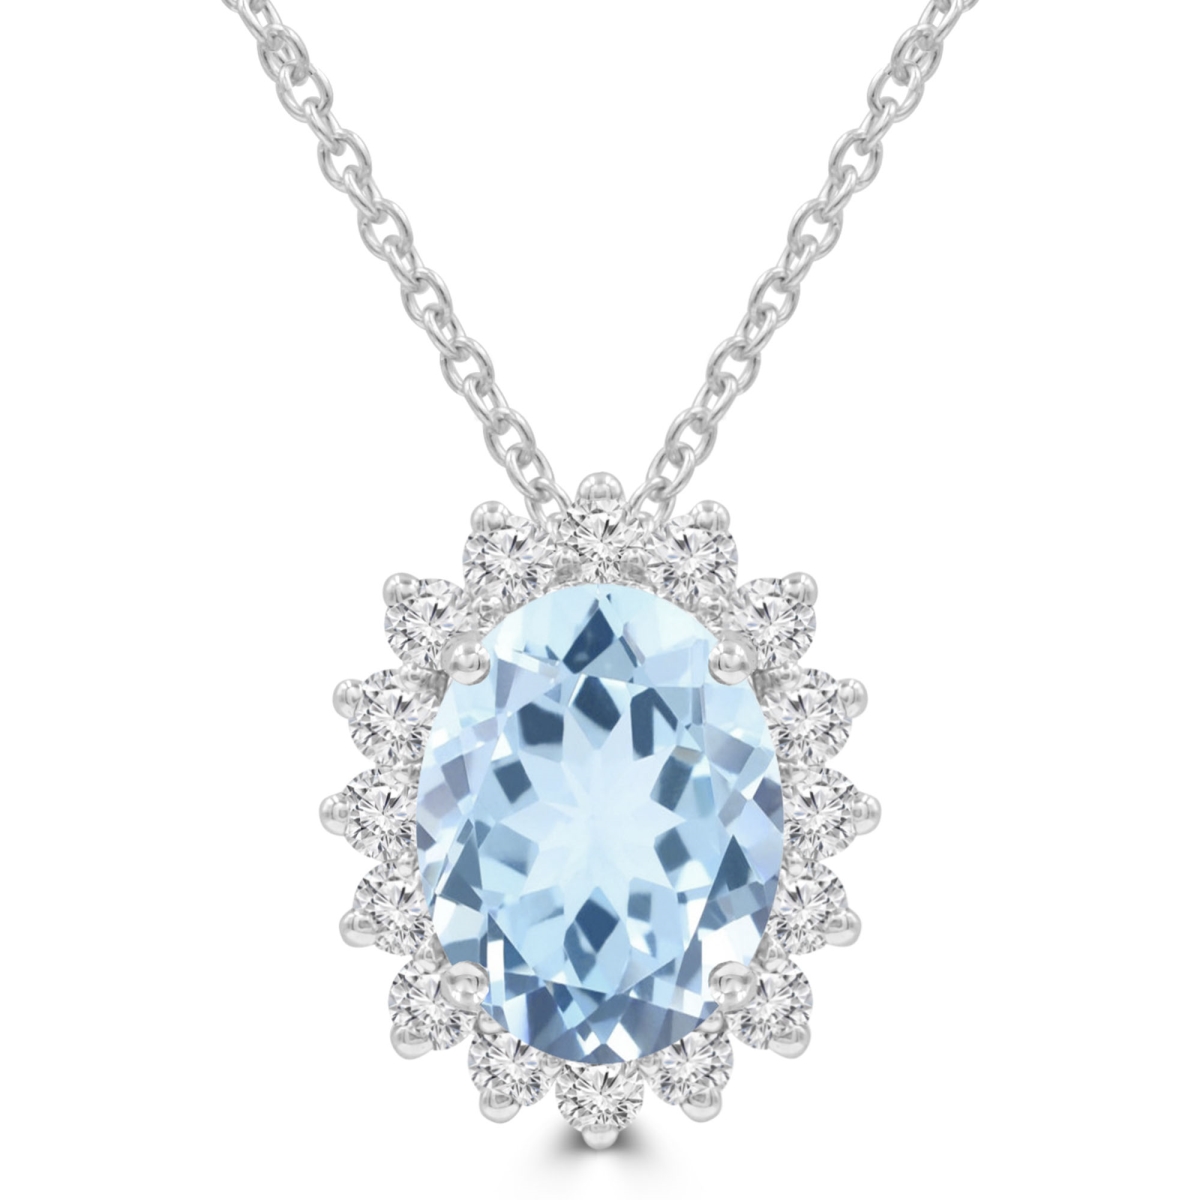 Picture of Majesty Diamonds MDR220138 3.6 CTW Oval Blue Topaz Oval Floral Halo Pendant Necklace in 14K White Gold